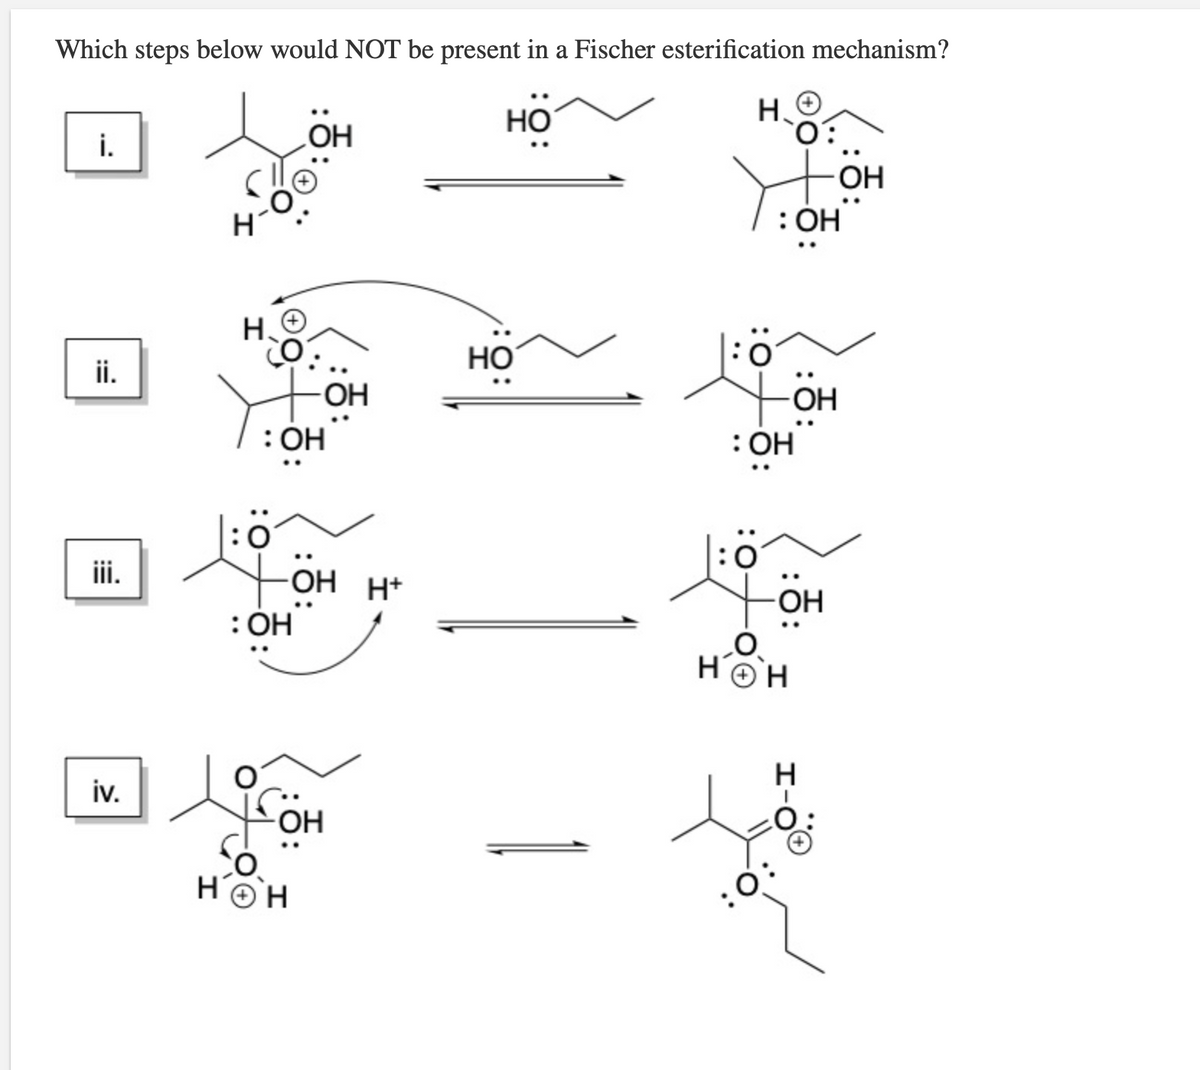 Which steps below would NOT be present in a Fischer esterification mechanism?
HO
H.
i.
HO
HO-
: ОН
H.
Но
ii.
OH
OH
: OH
|:ö
OH H+
: ОН
:0
ii.
OH
HOH
iv.
OH
HOH
:0
:0:
:=
